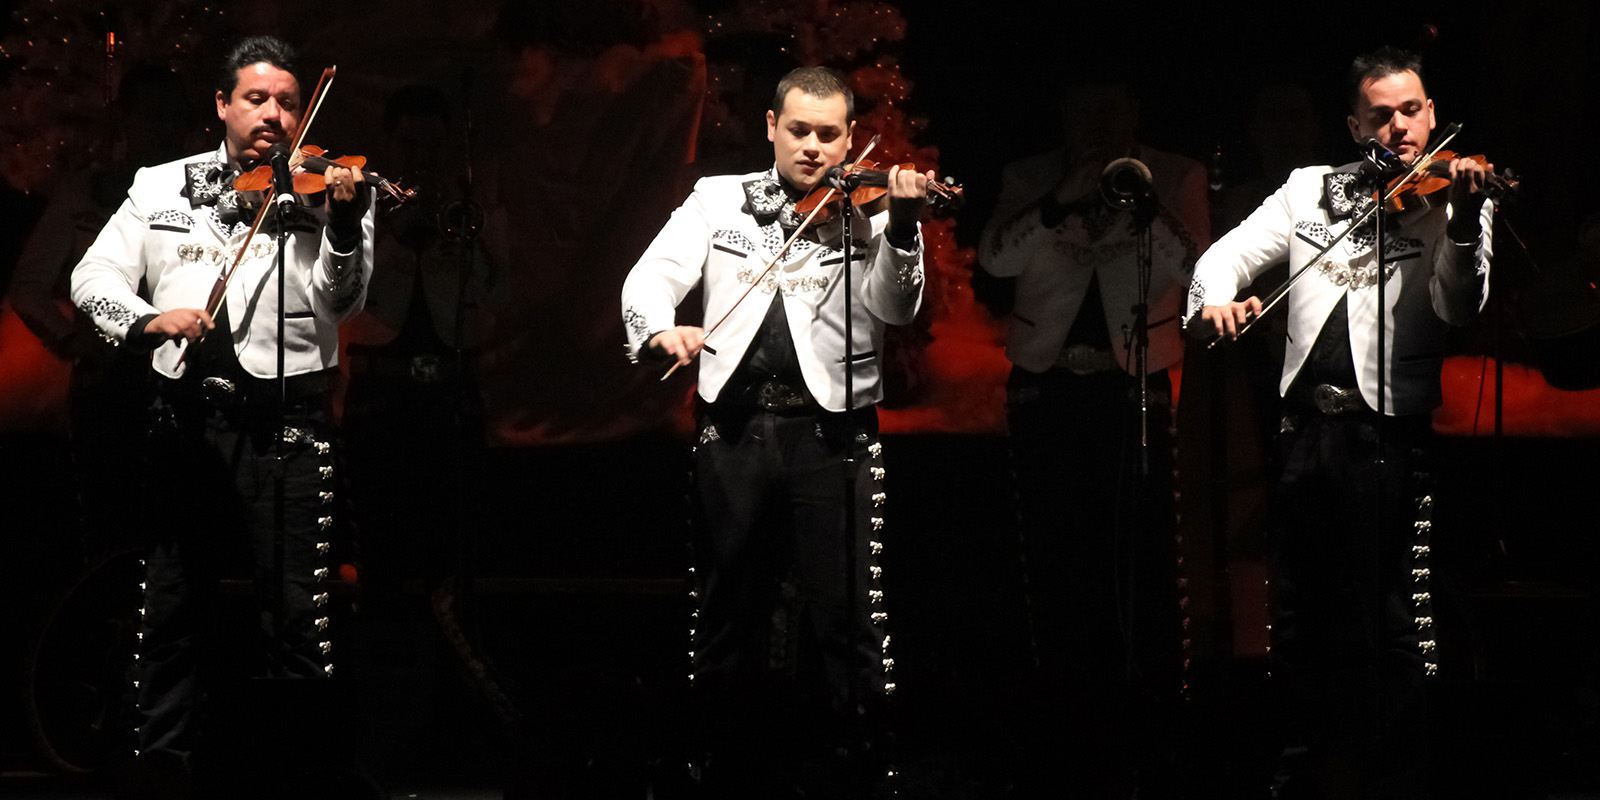 Three men in traditional Mexican mariachi clothing play violins